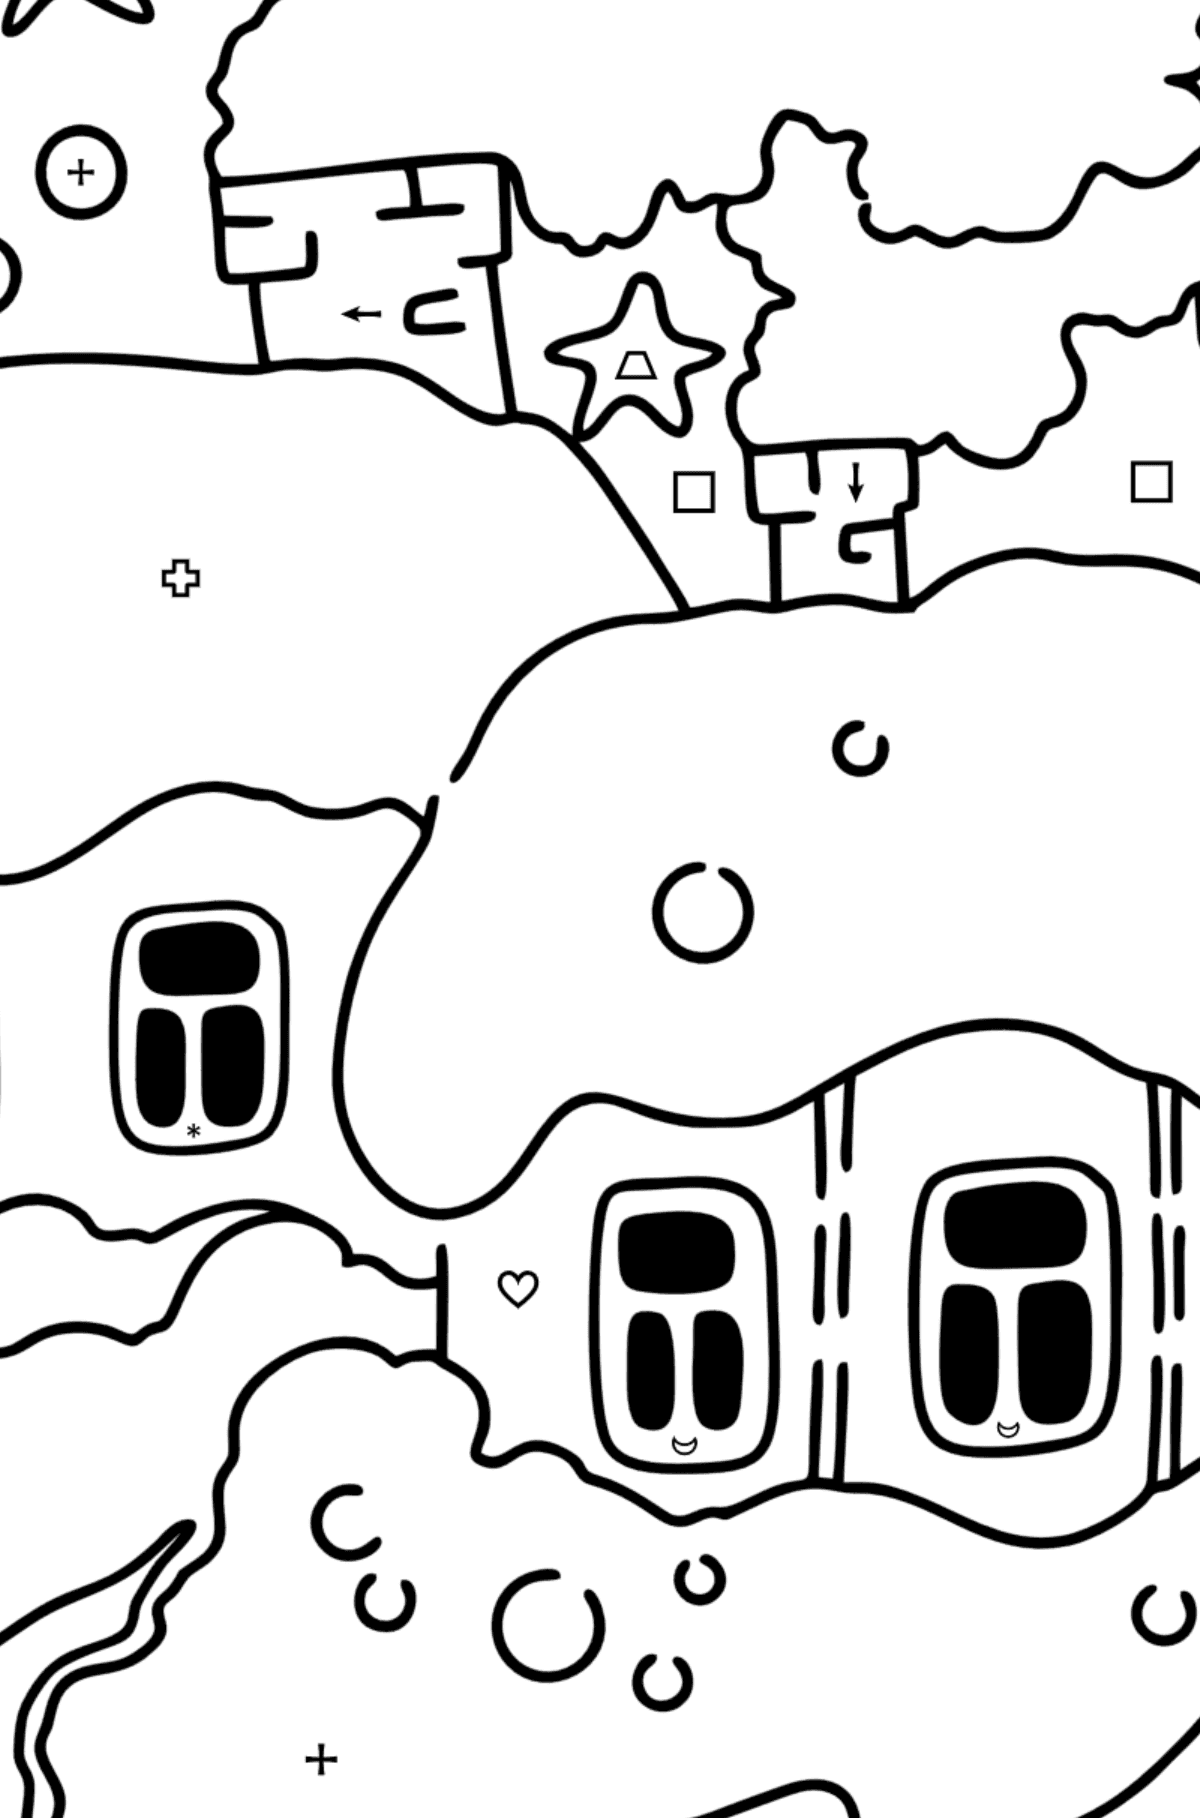 Coloring page - Winter Night - Coloring by Symbols and Geometric Shapes for Kids